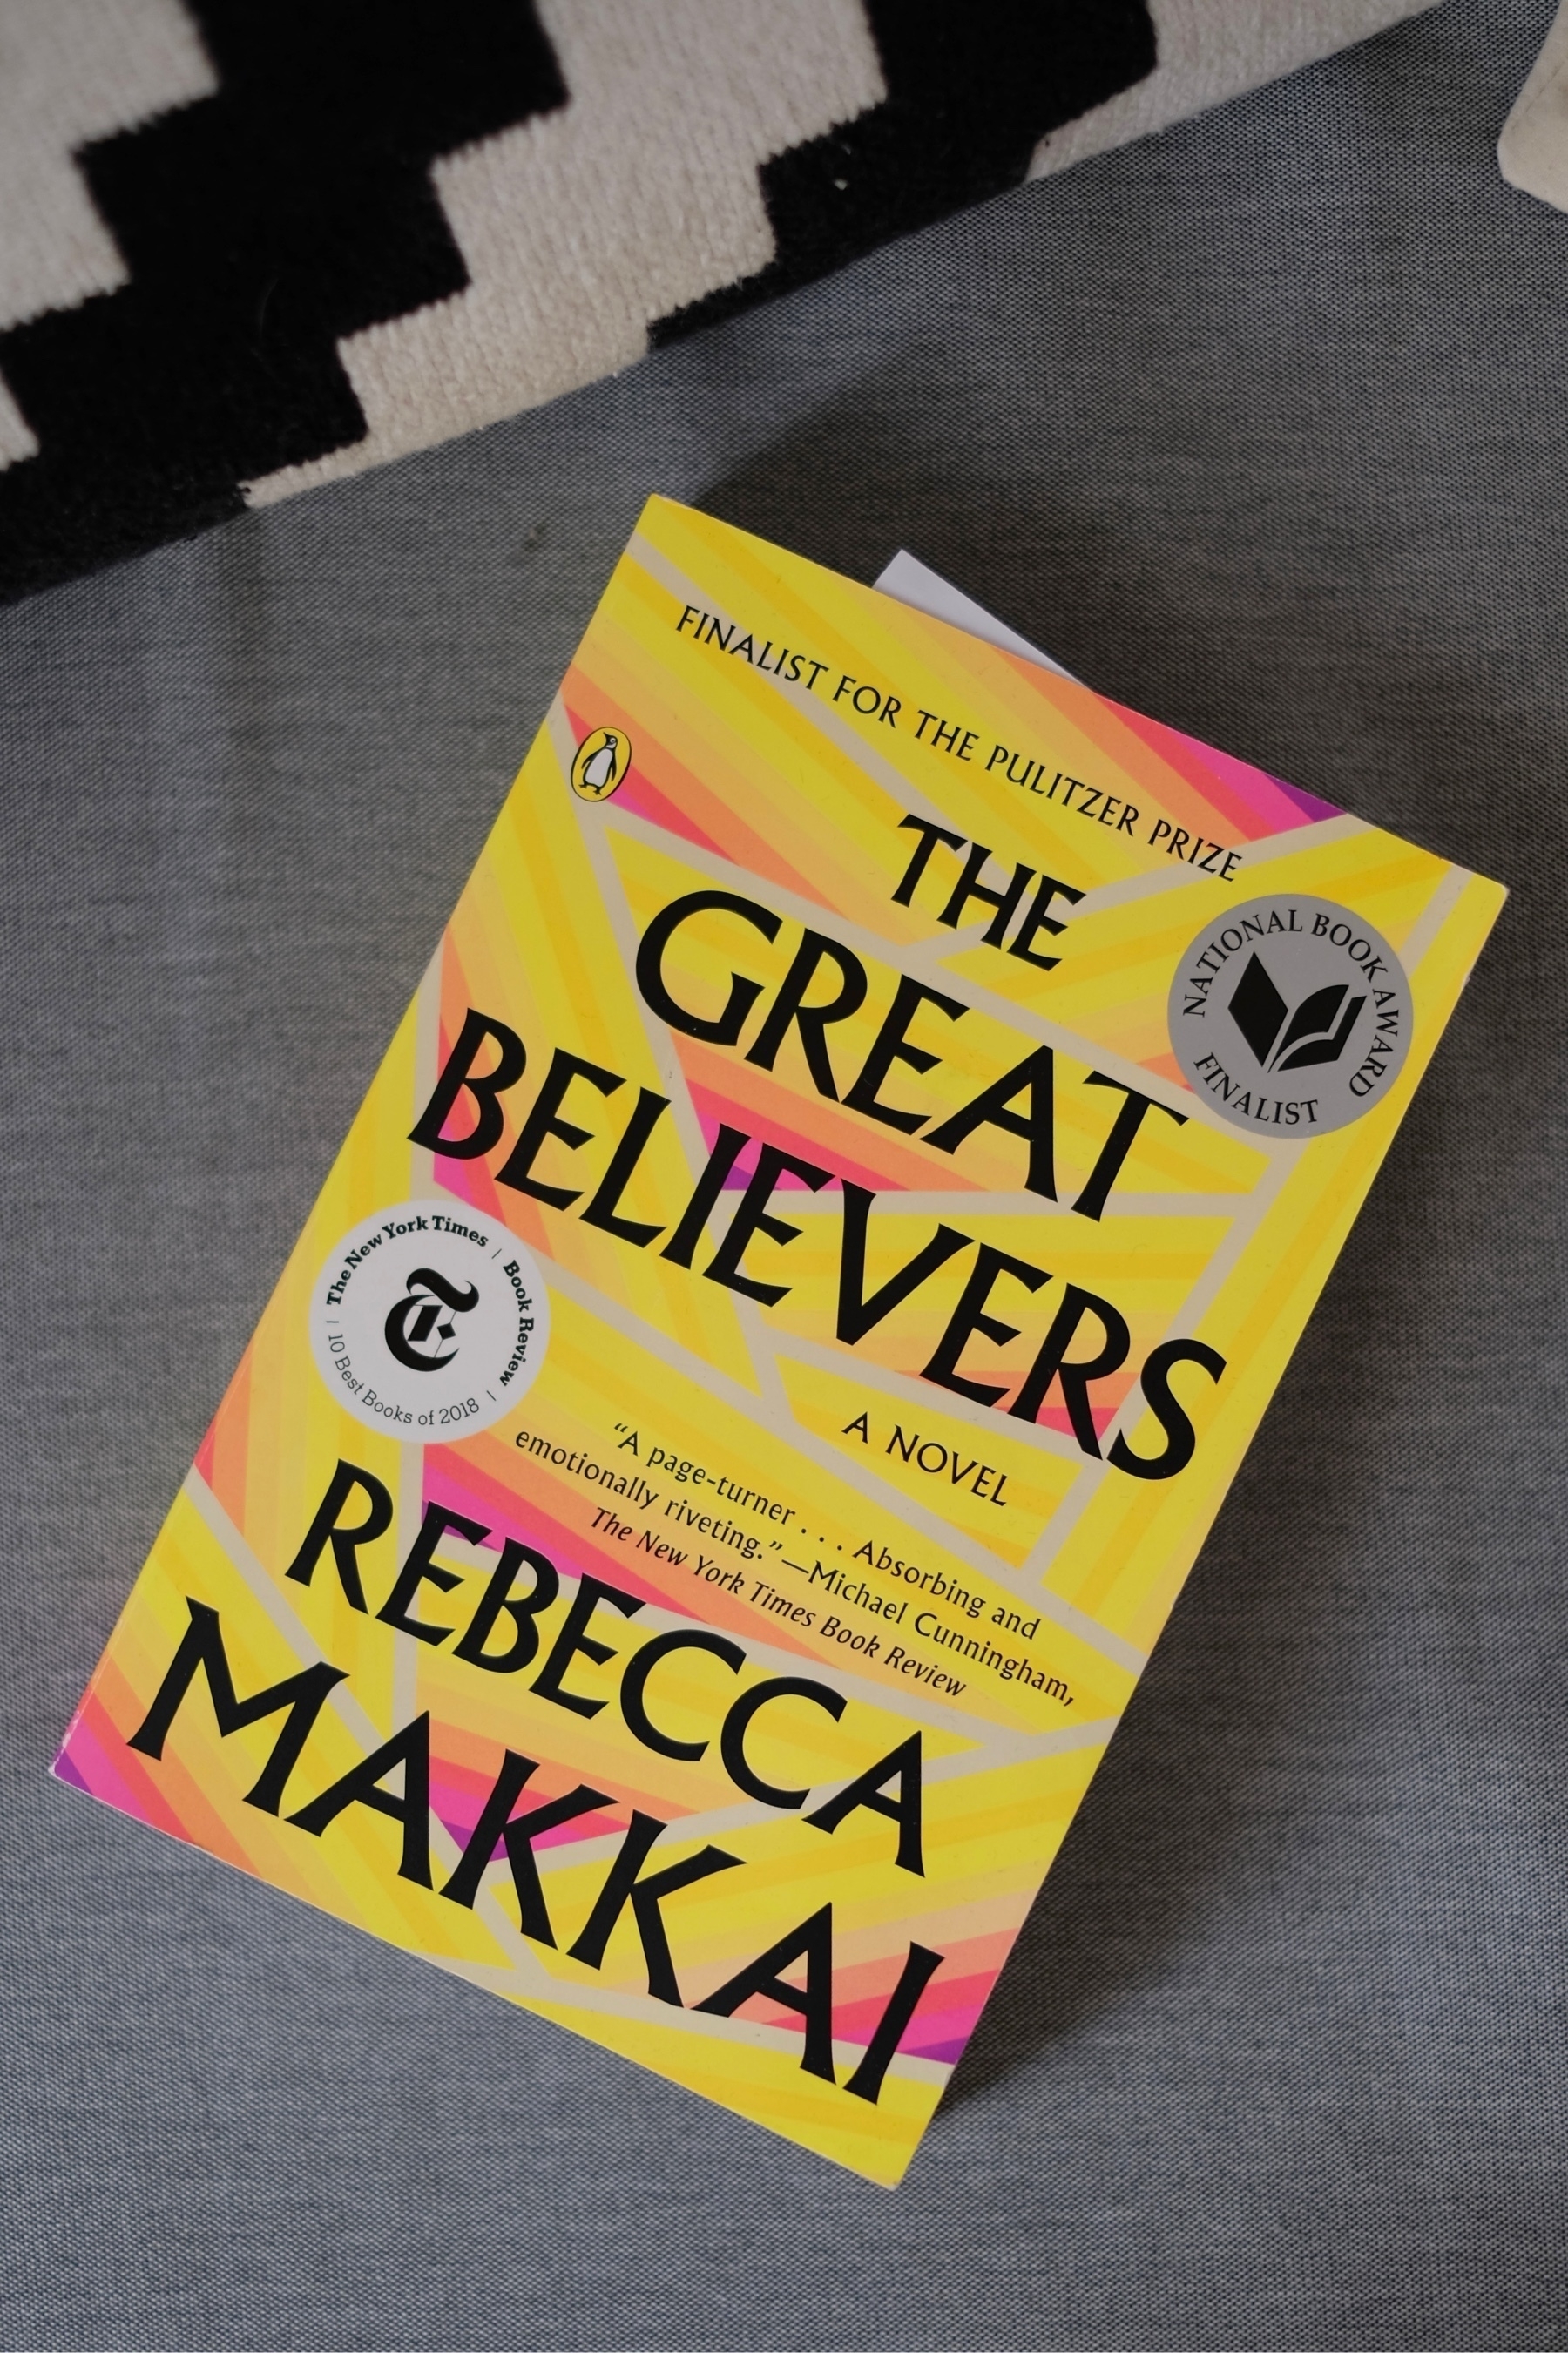 Physical copy of The Great Believers by Rebecca Makkai